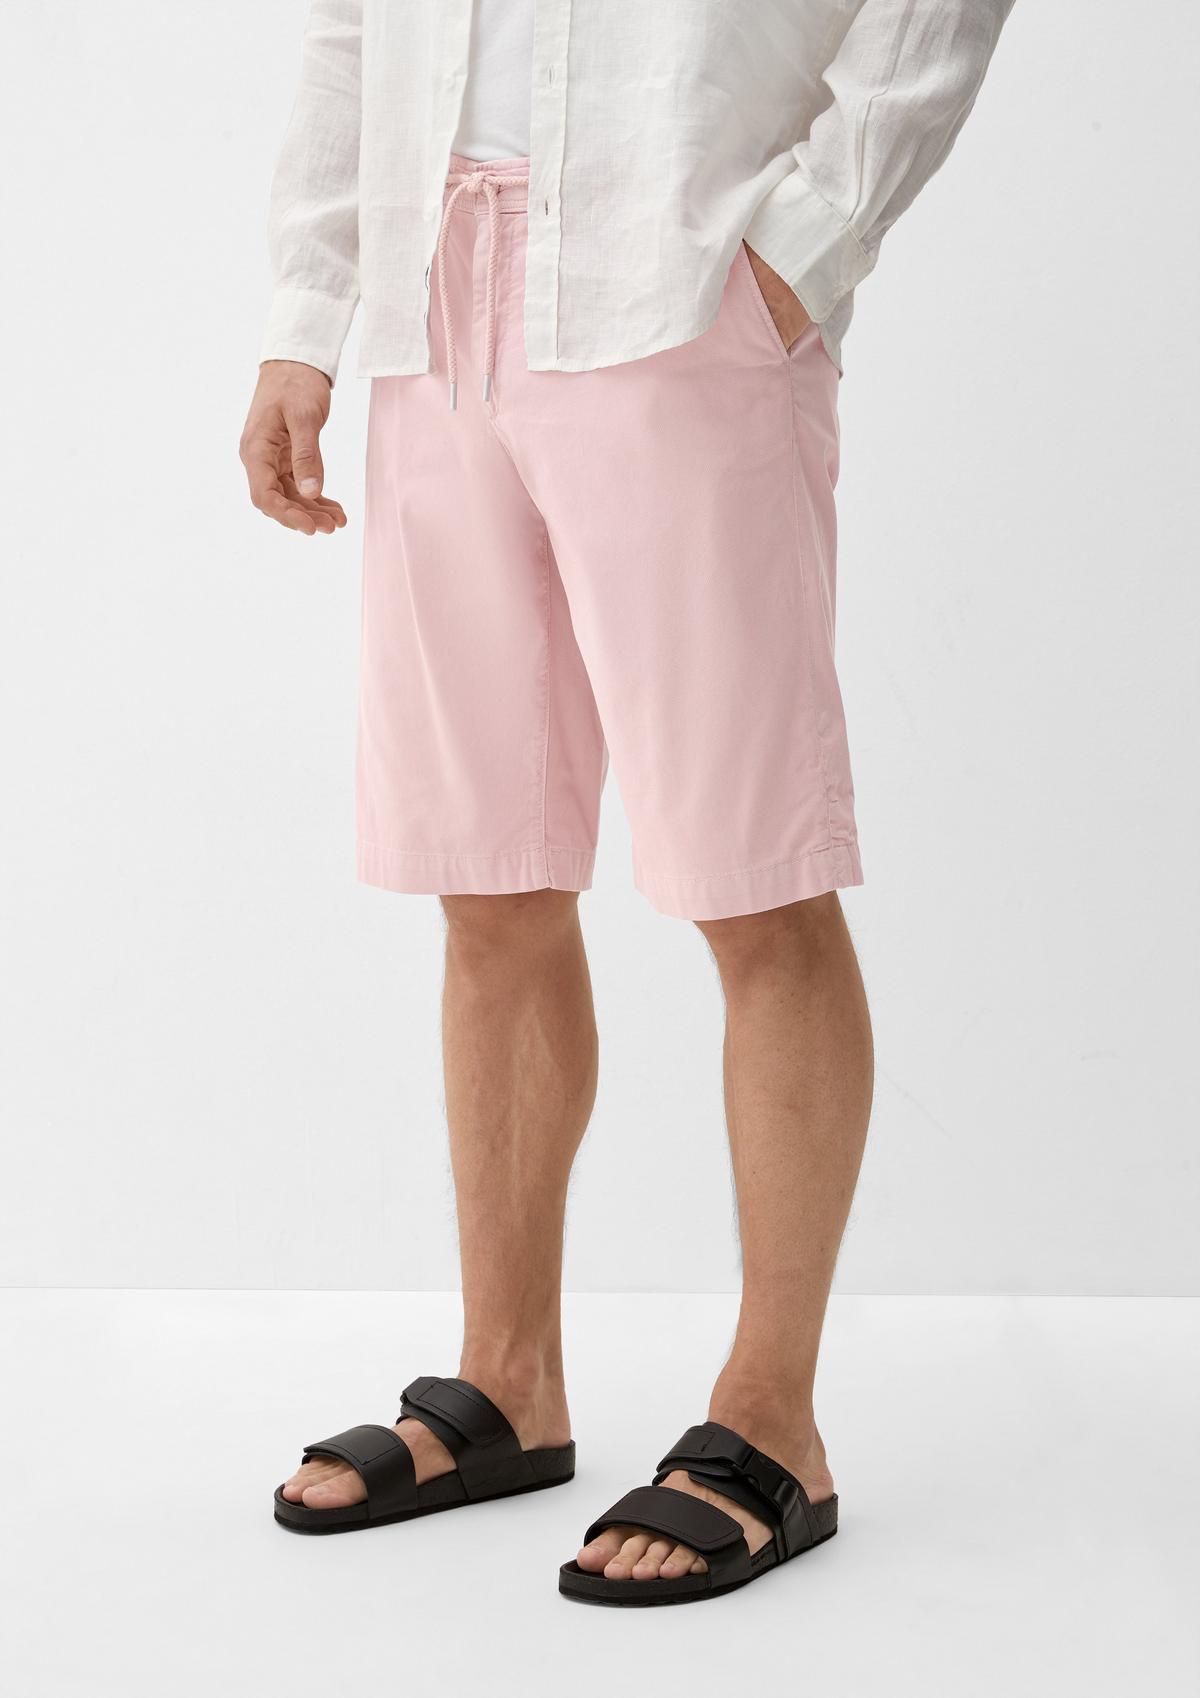 Relaxed fit: Bermuda shorts with drawstring